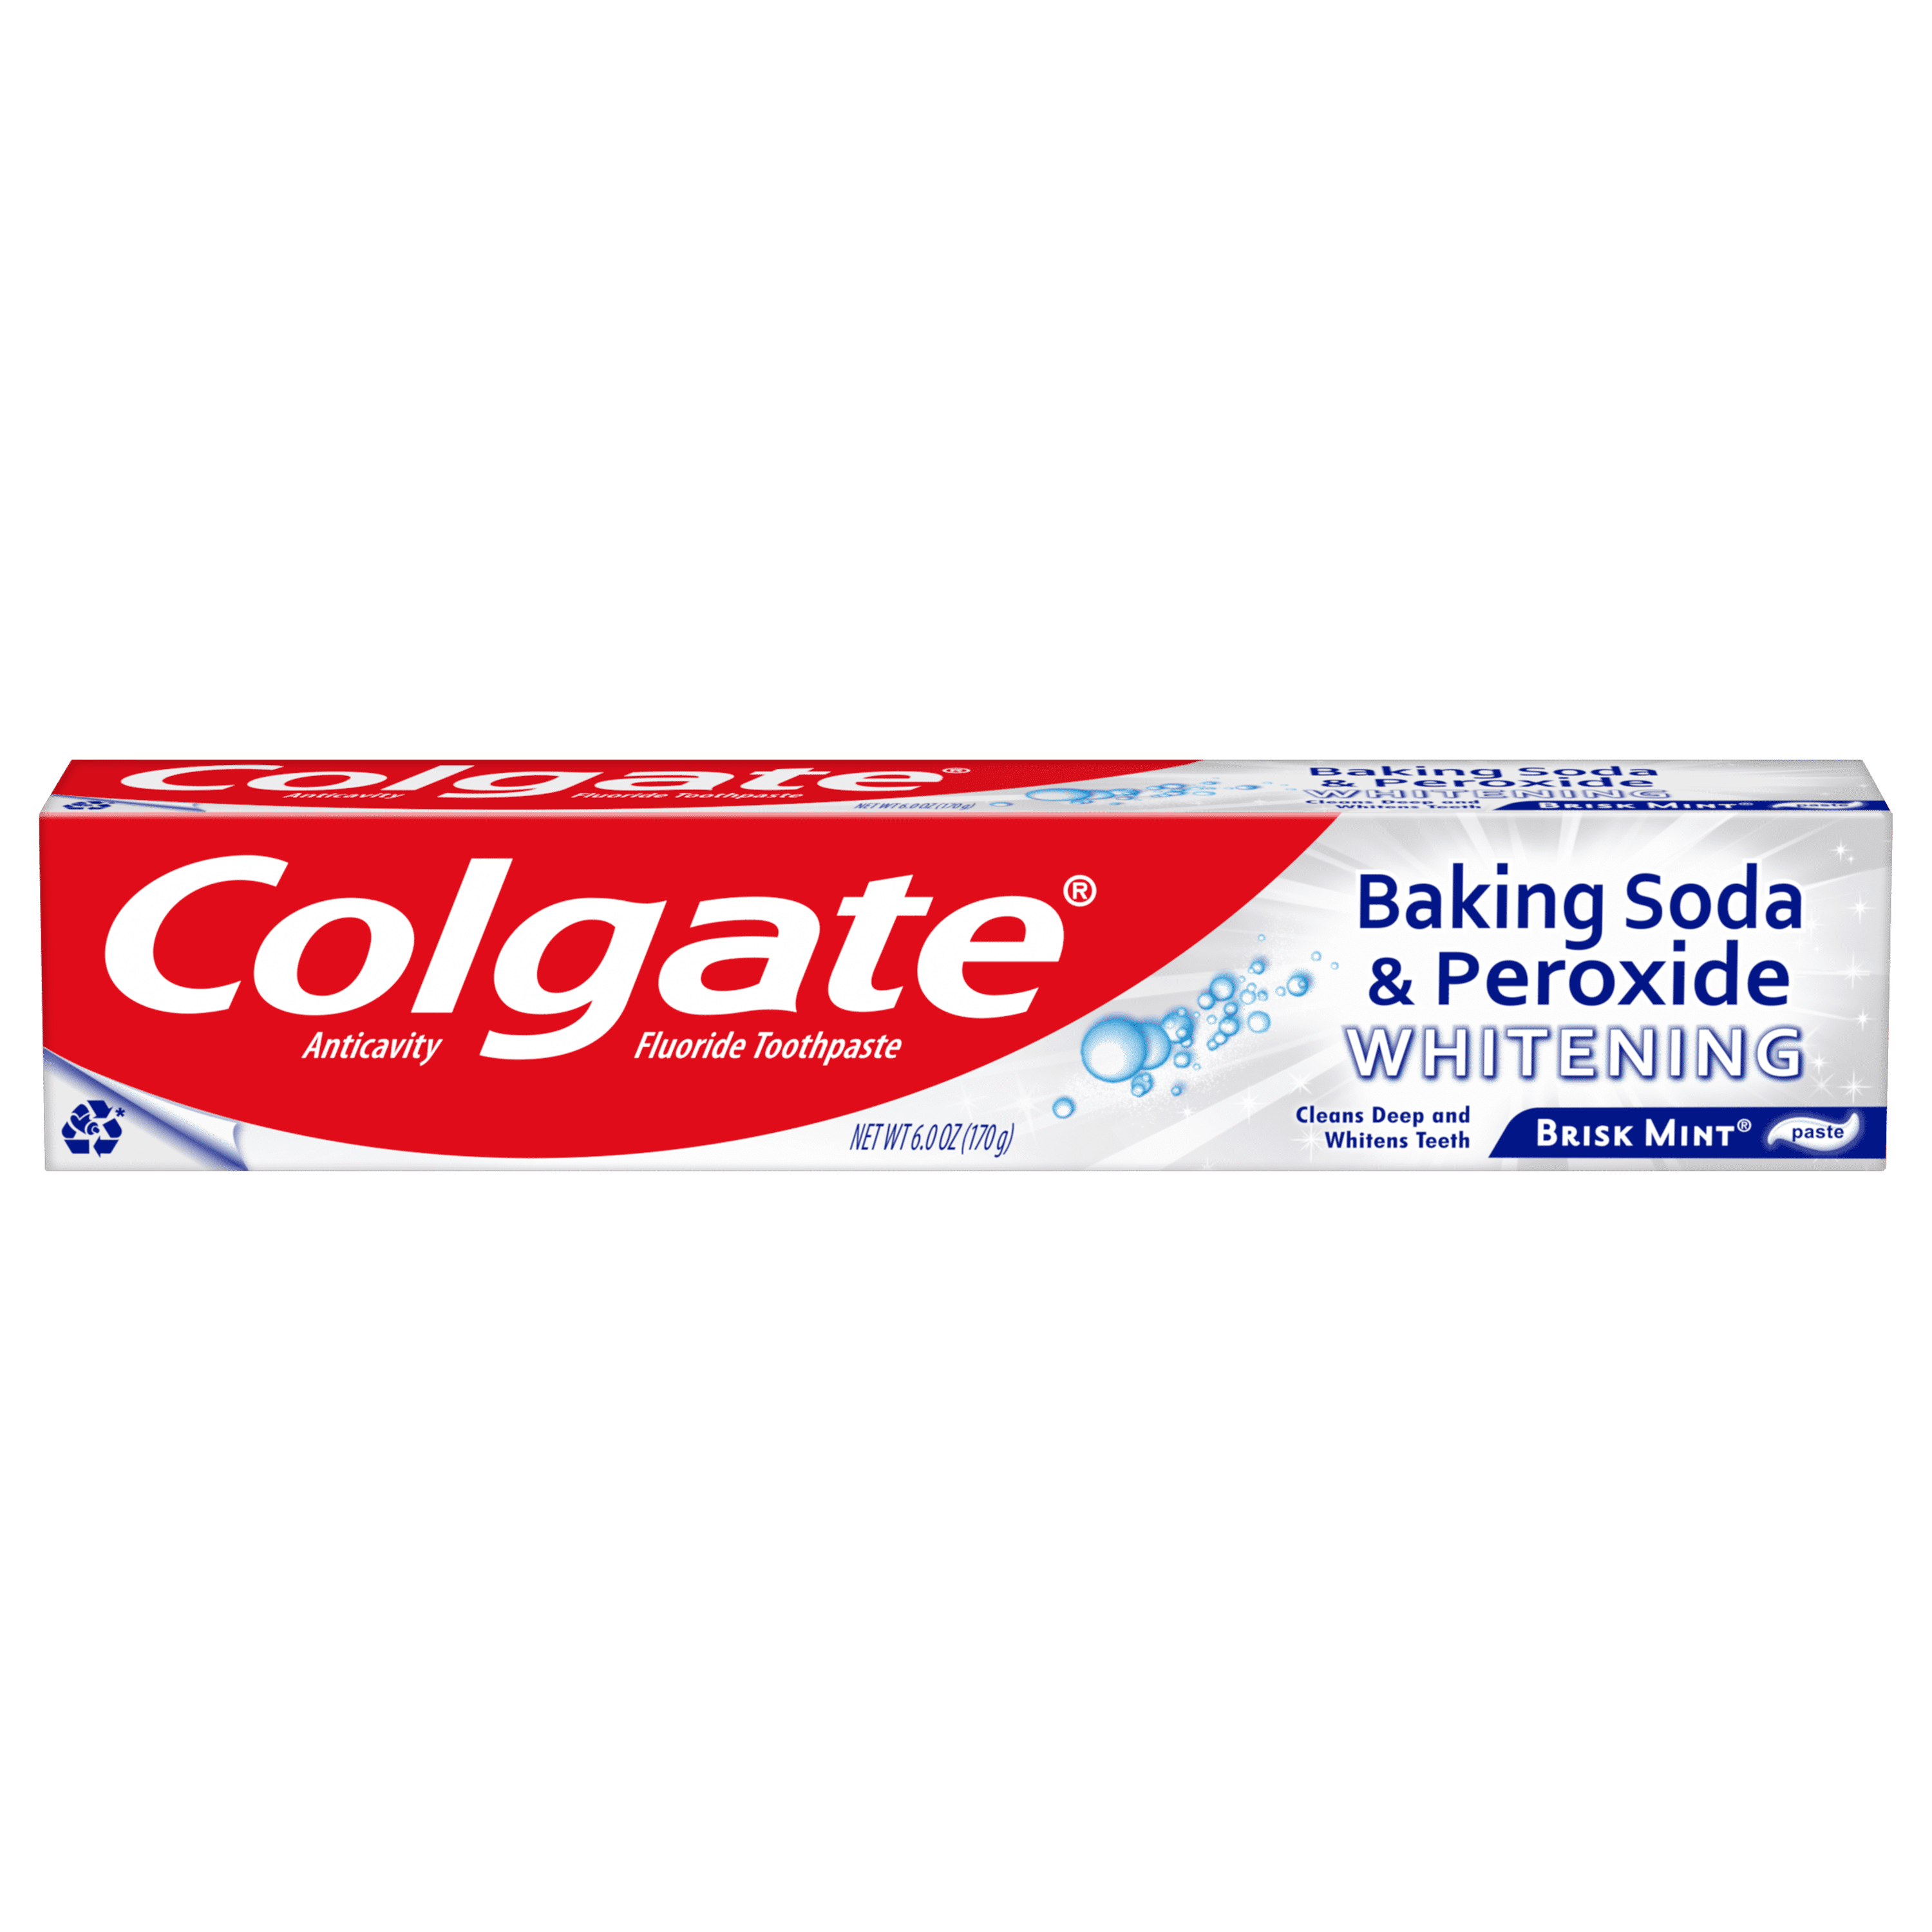 Colgate Baking Soda and Peroxide Toothpaste, Brisk Mint, 6 oz Tube